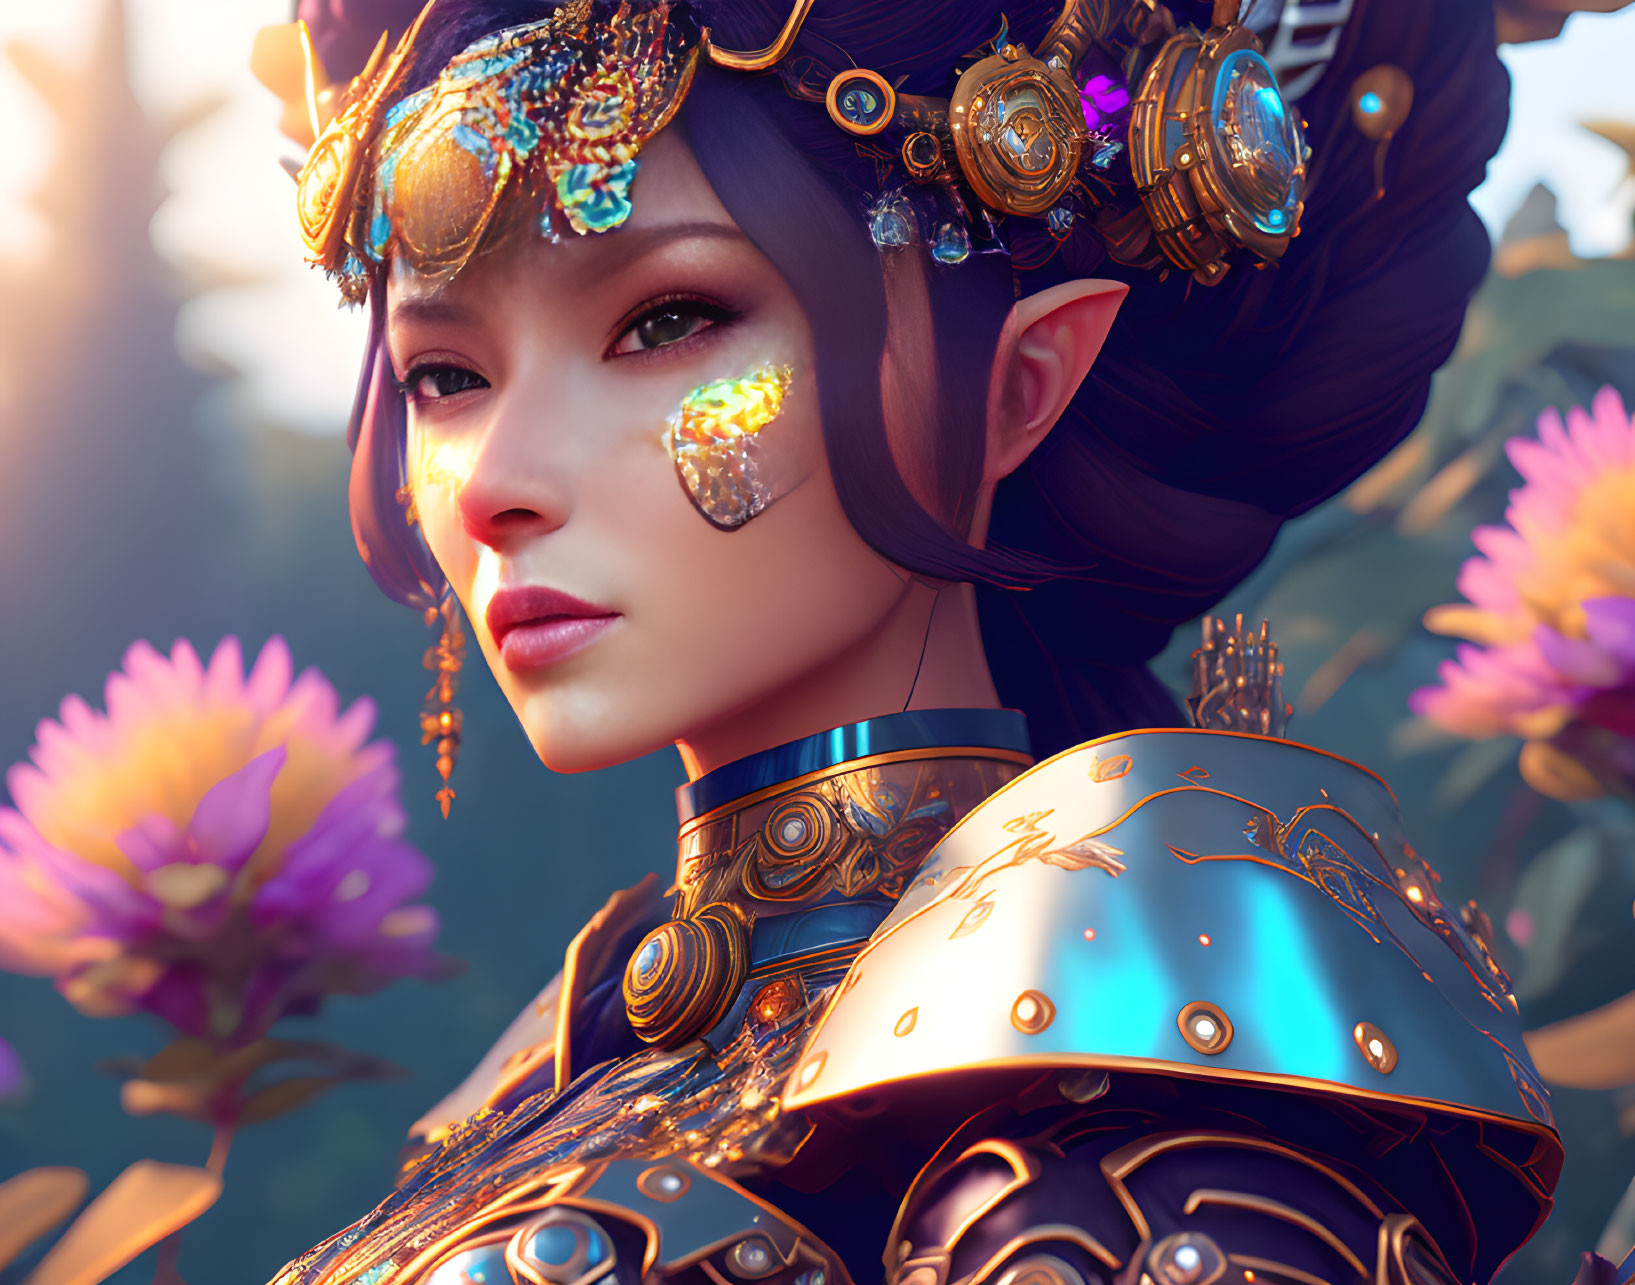 Fantasy character in blue armor surrounded by flowers